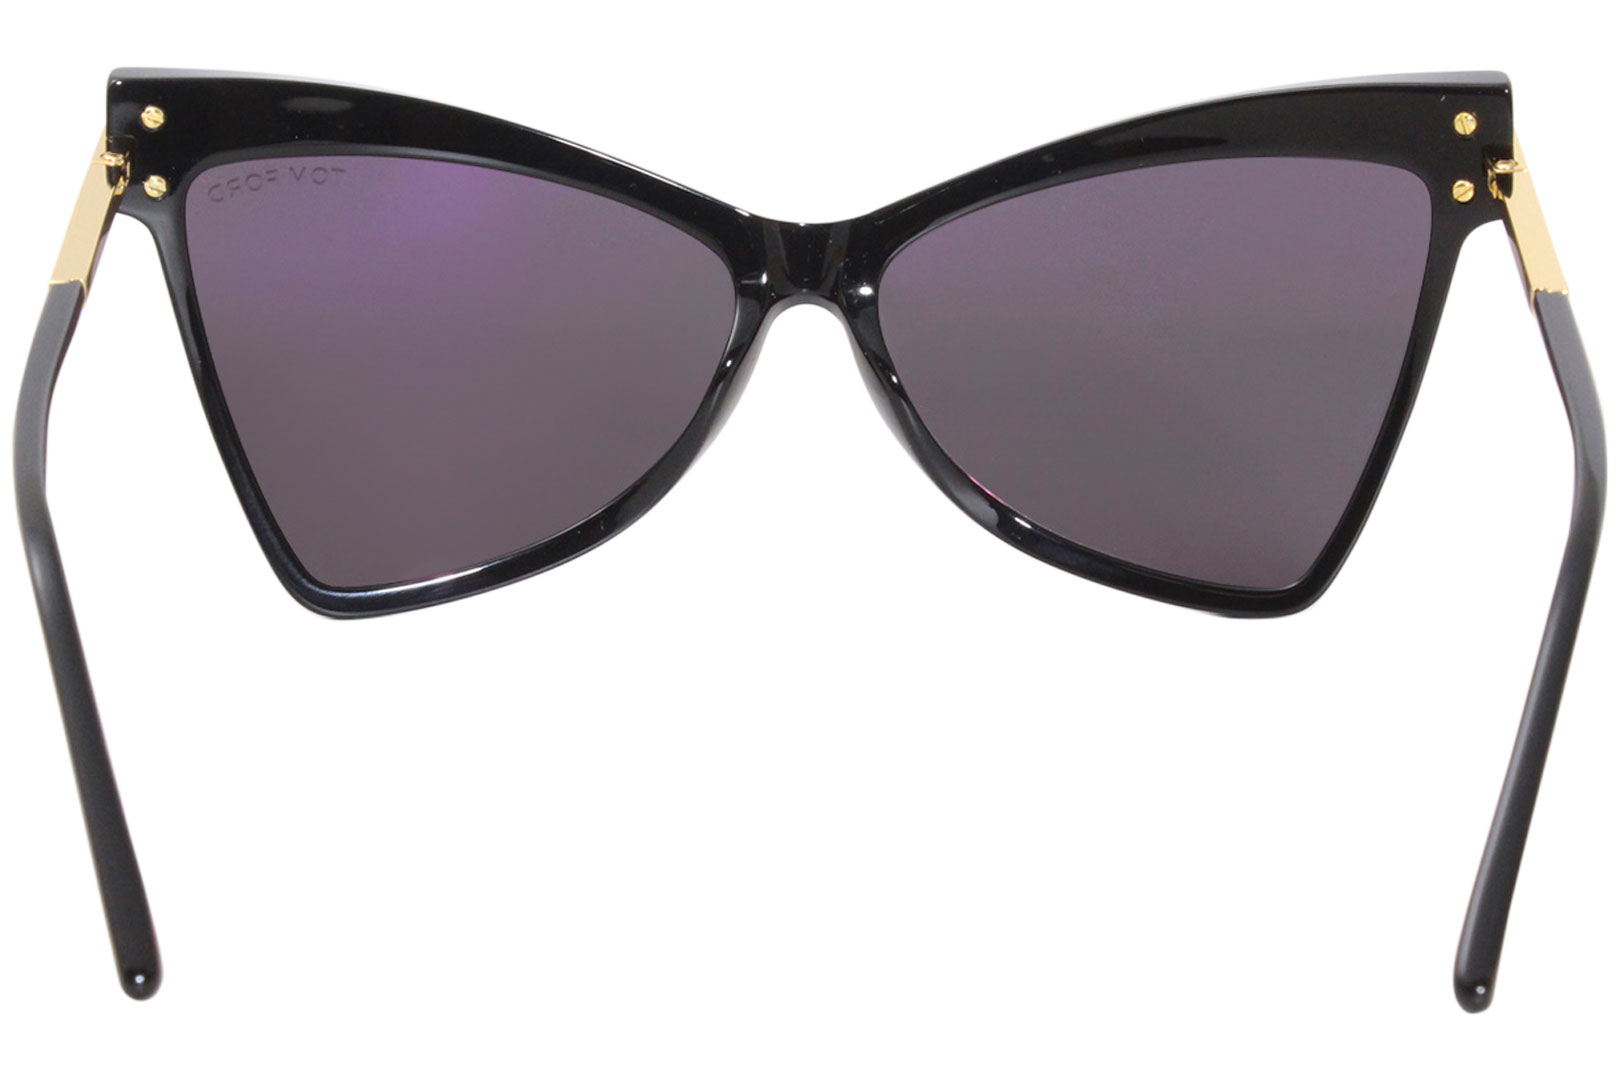 Tom Ford Tallulah TF767 Sunglasses Women's Fashion Butterfly Shades |  